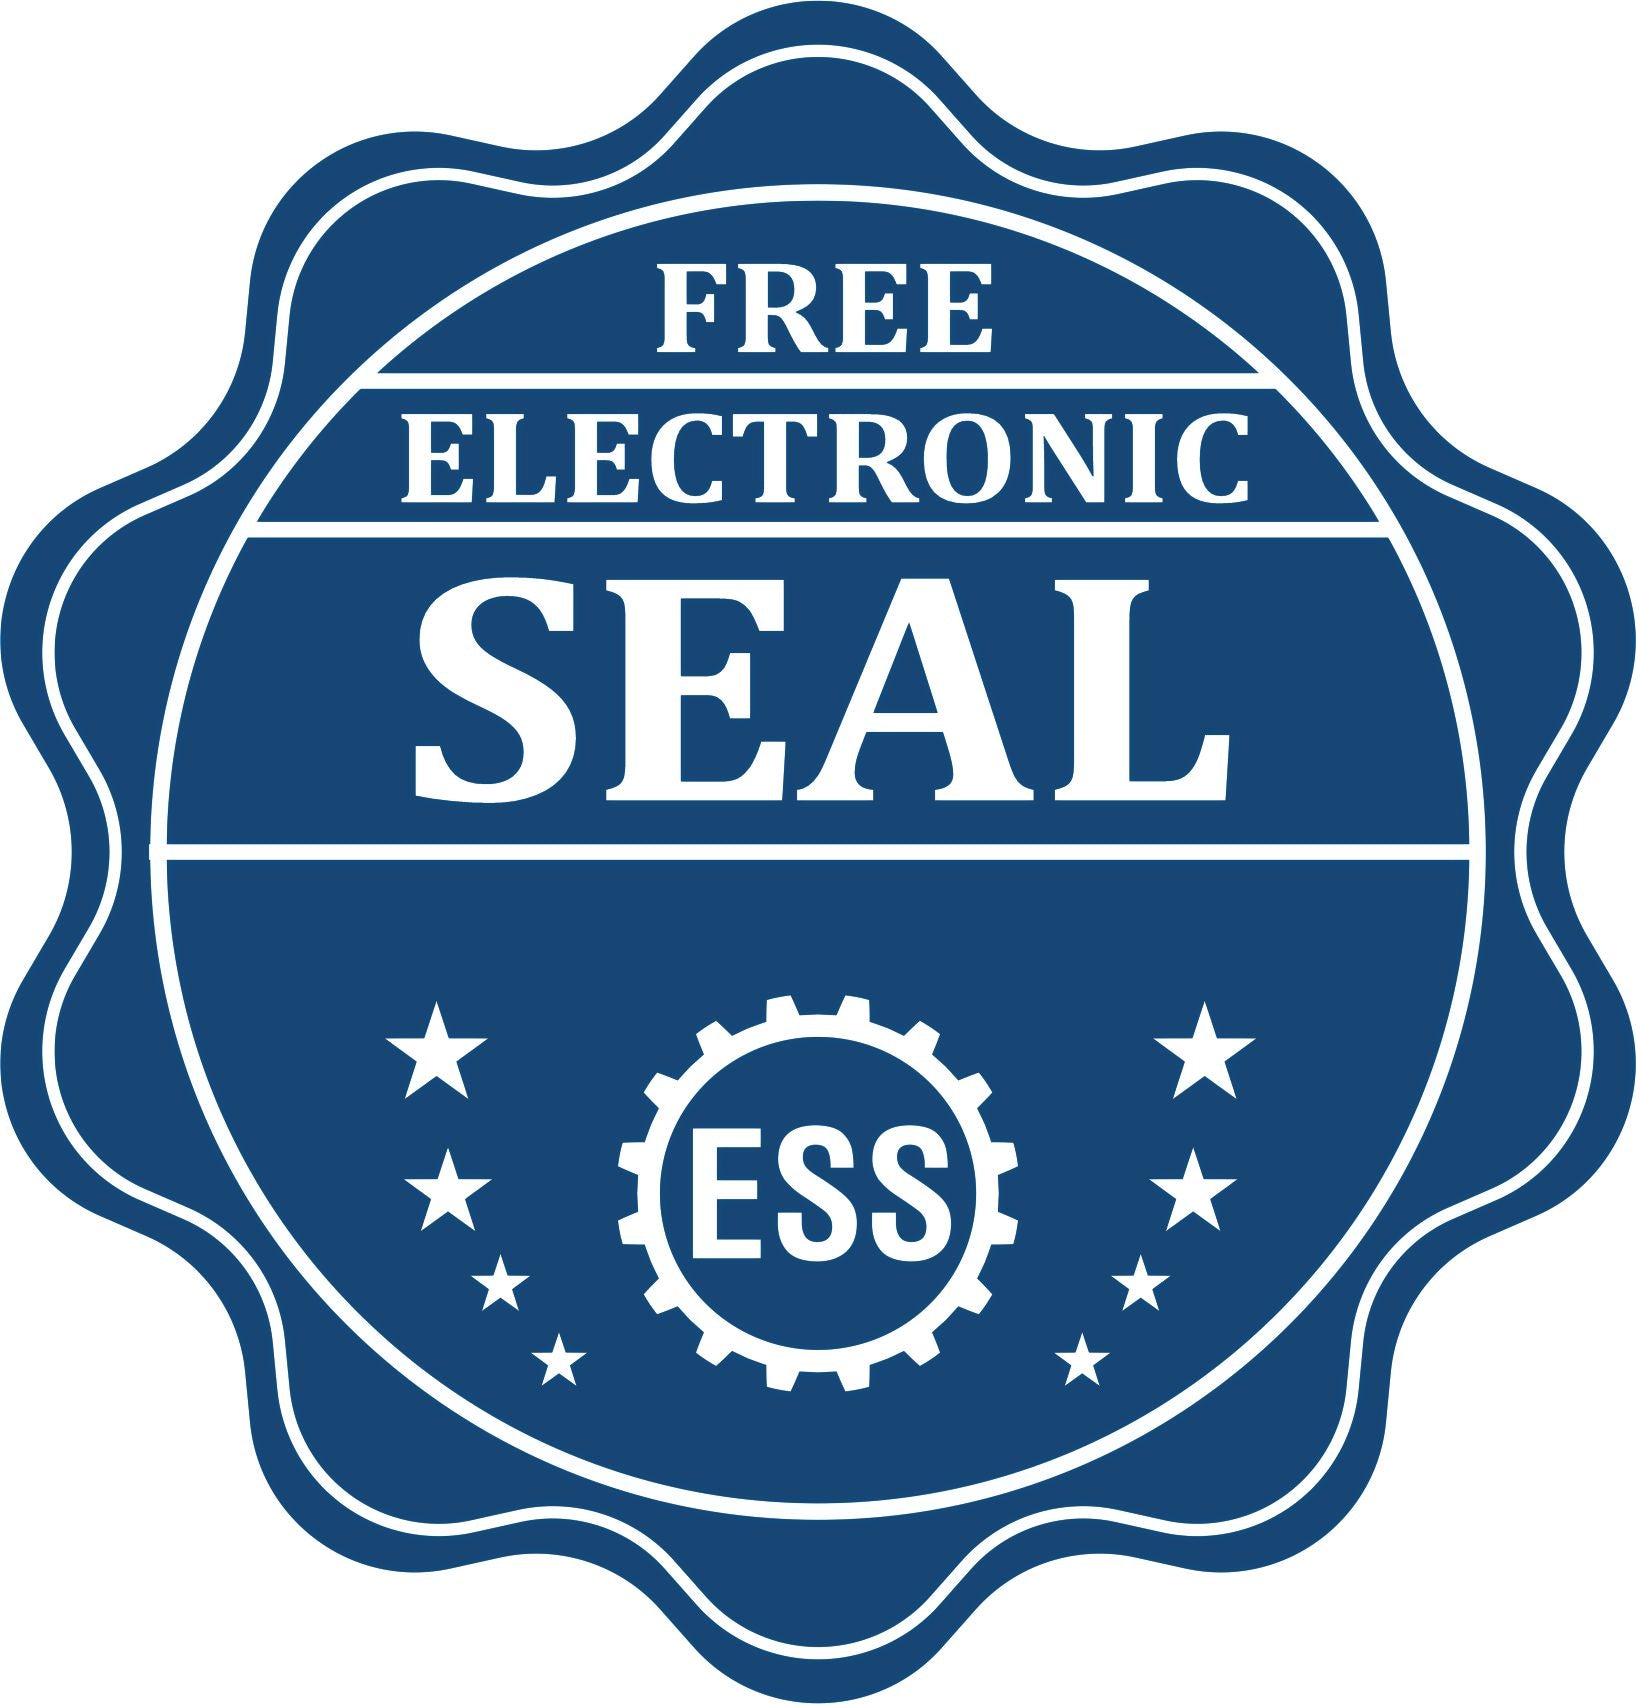 A badge showing a free electronic seal for the Wooden Handle Michigan State Seal Notary Public Stamp with stars and the ESS gear on the emblem.